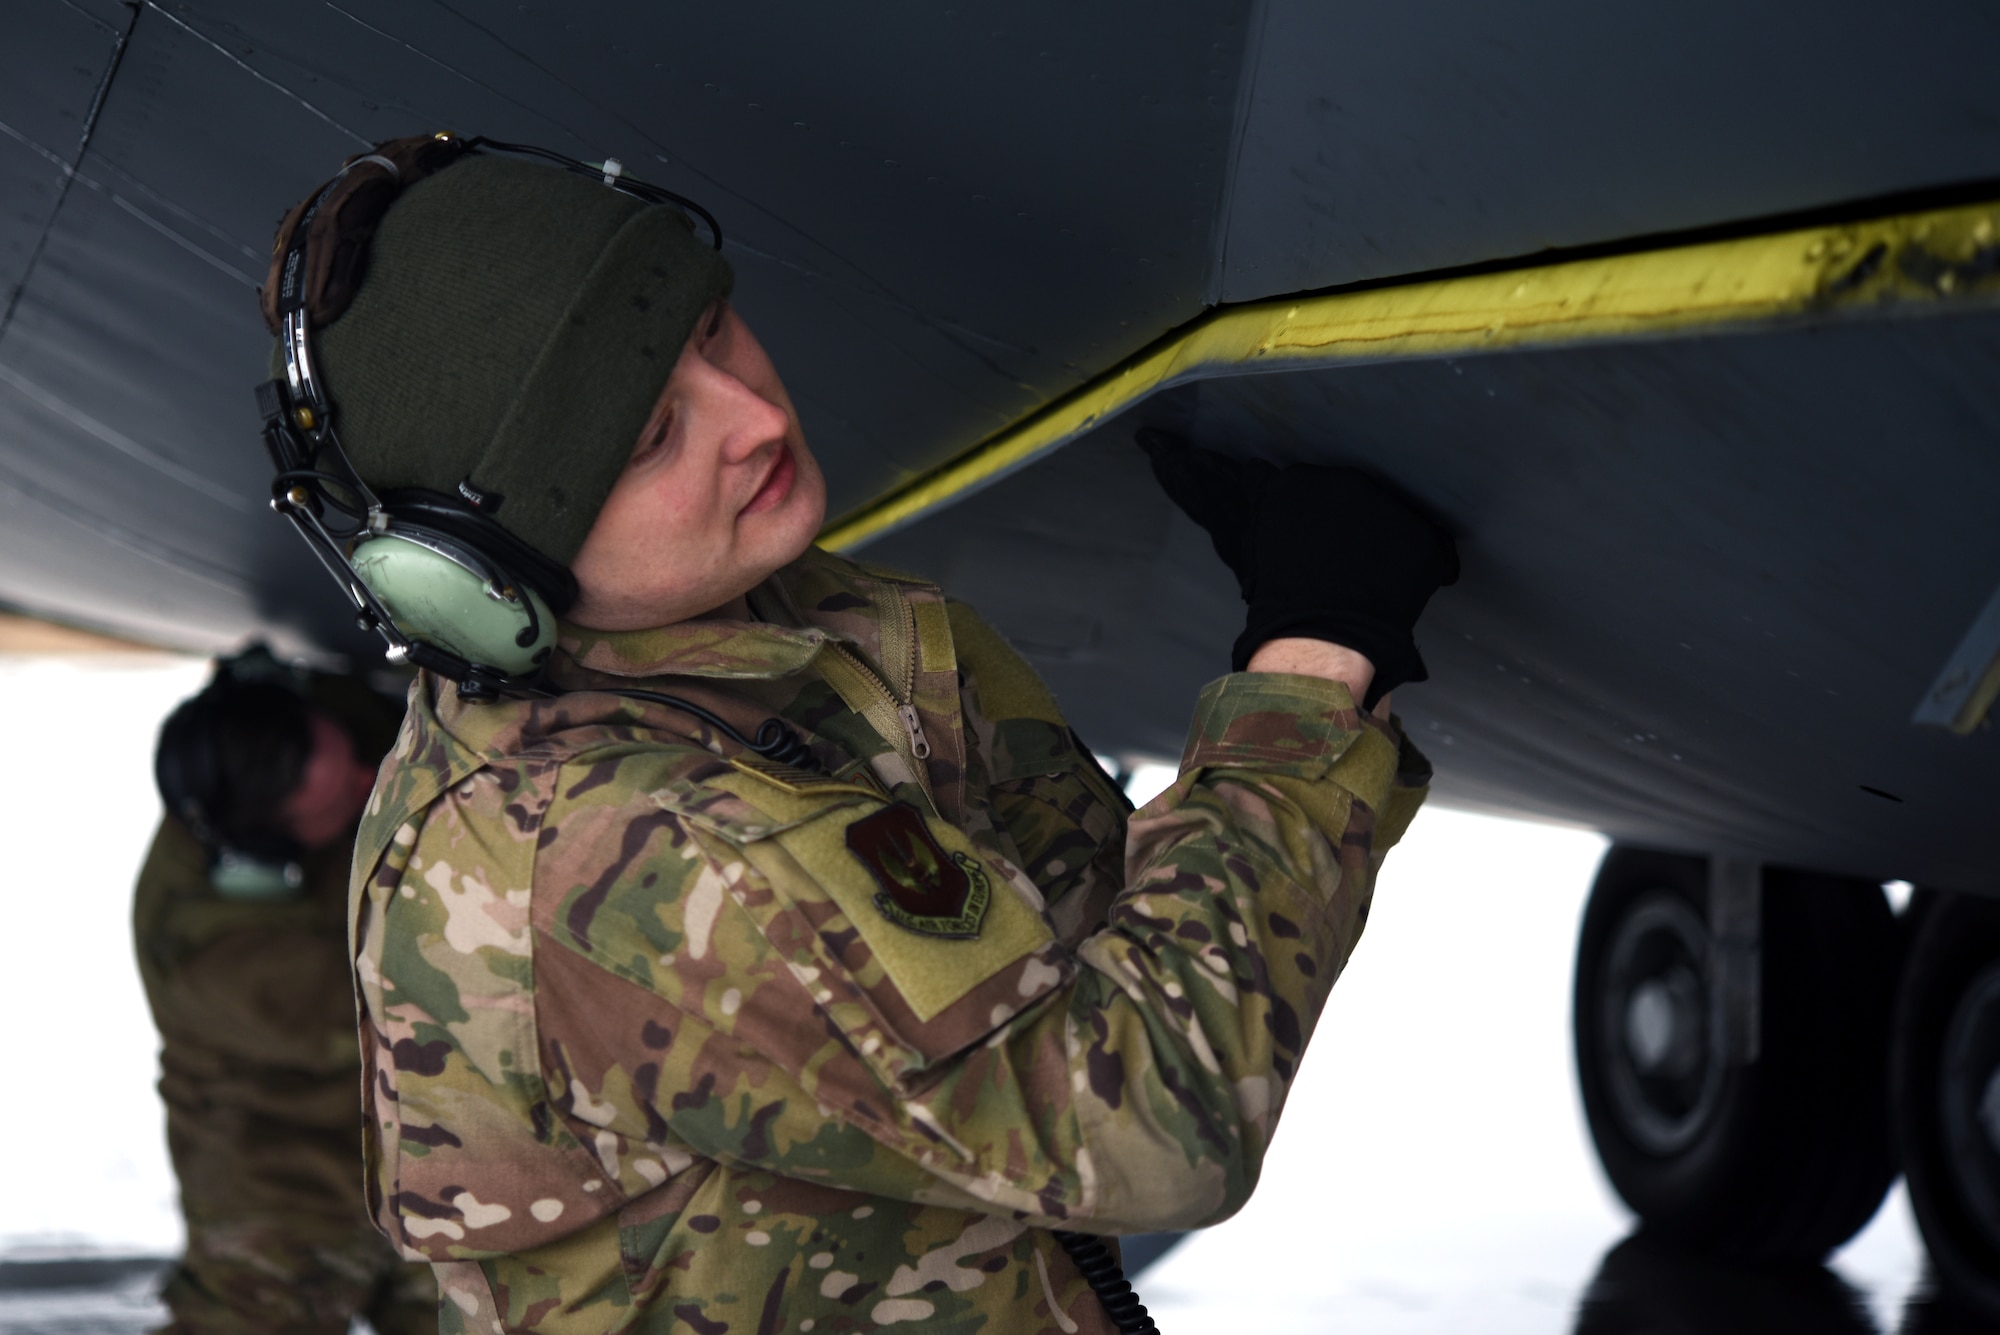 U.S. Air Force Staff Sgt. Shannon Nations, 100th Aircraft Maintenance Squadron flying crew chief, preps a KC-135 Stratotanker from RAF Mildenhall during training with Romanian air force F-16s in Bucharest, Romania, March 12, 2019. The crew was involved in training with Romanian air force F-16s over the skies of Romania, which enhanced regional capabilities to secure air sovereignty and promote peace and security through cooperation, collaboration, interoperability with NATO allies in the region. (U.S. Air Force photo by Airman 1st Class Brandon Esau)